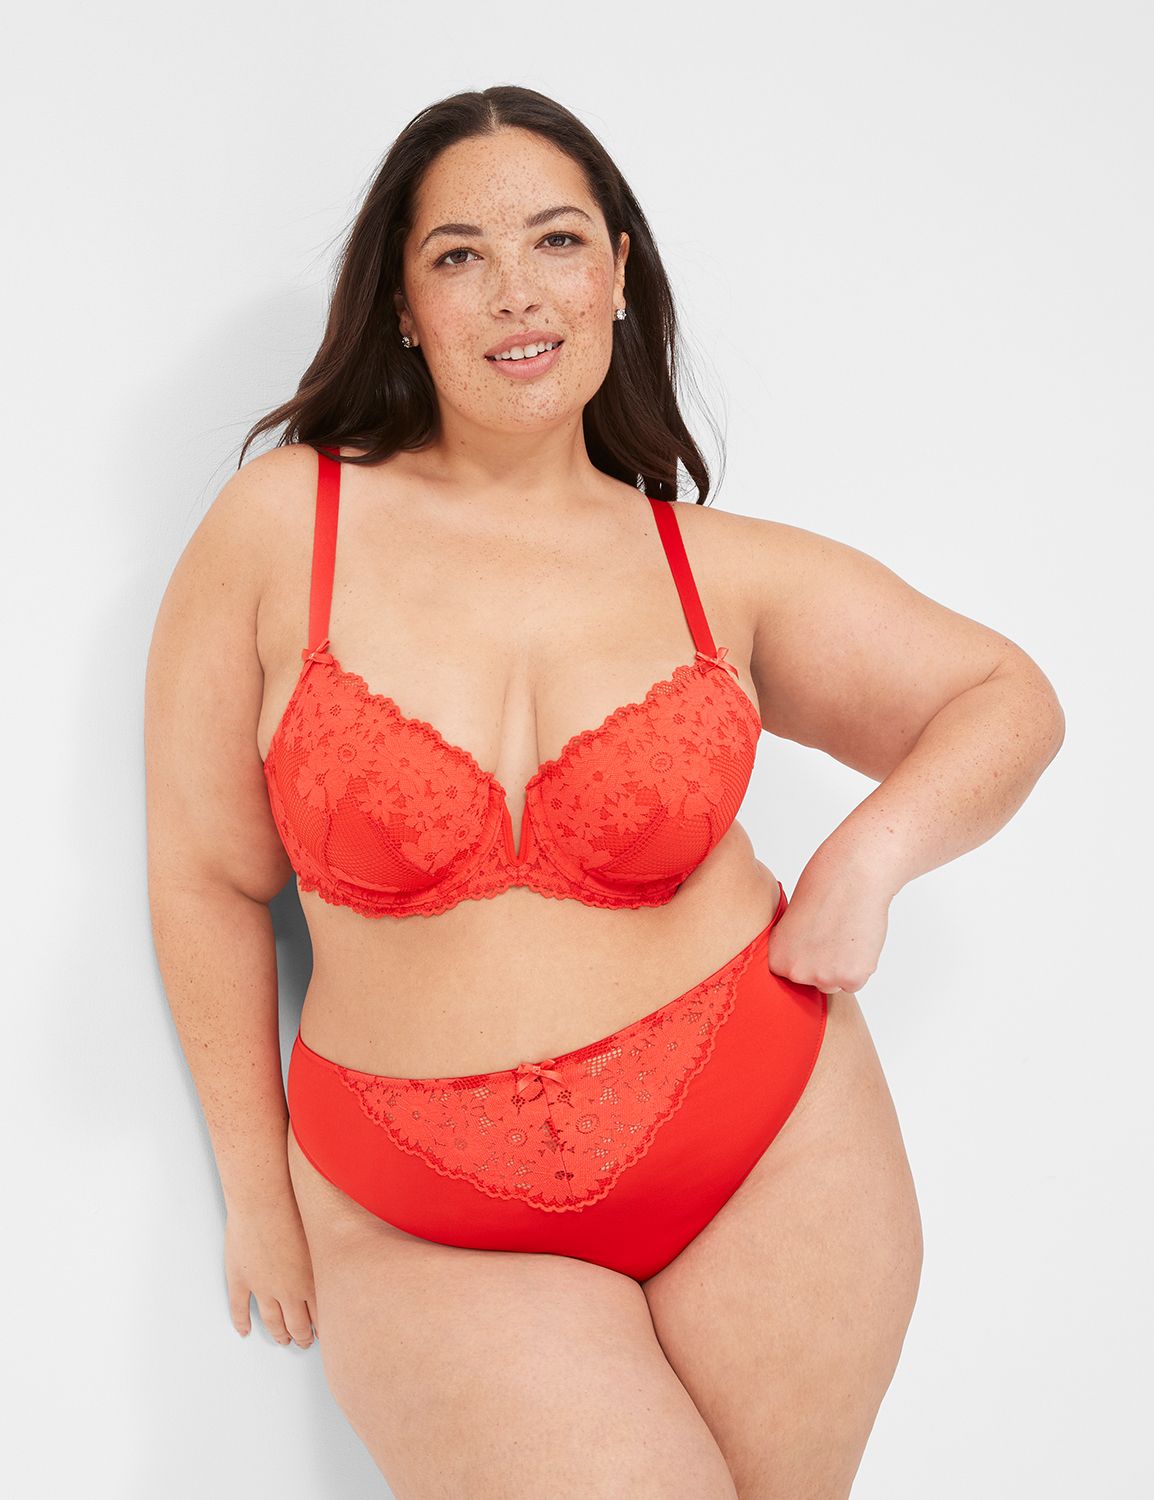 iLoveSexy Features Their Plus Size Lingerie Collection for Curvy Women